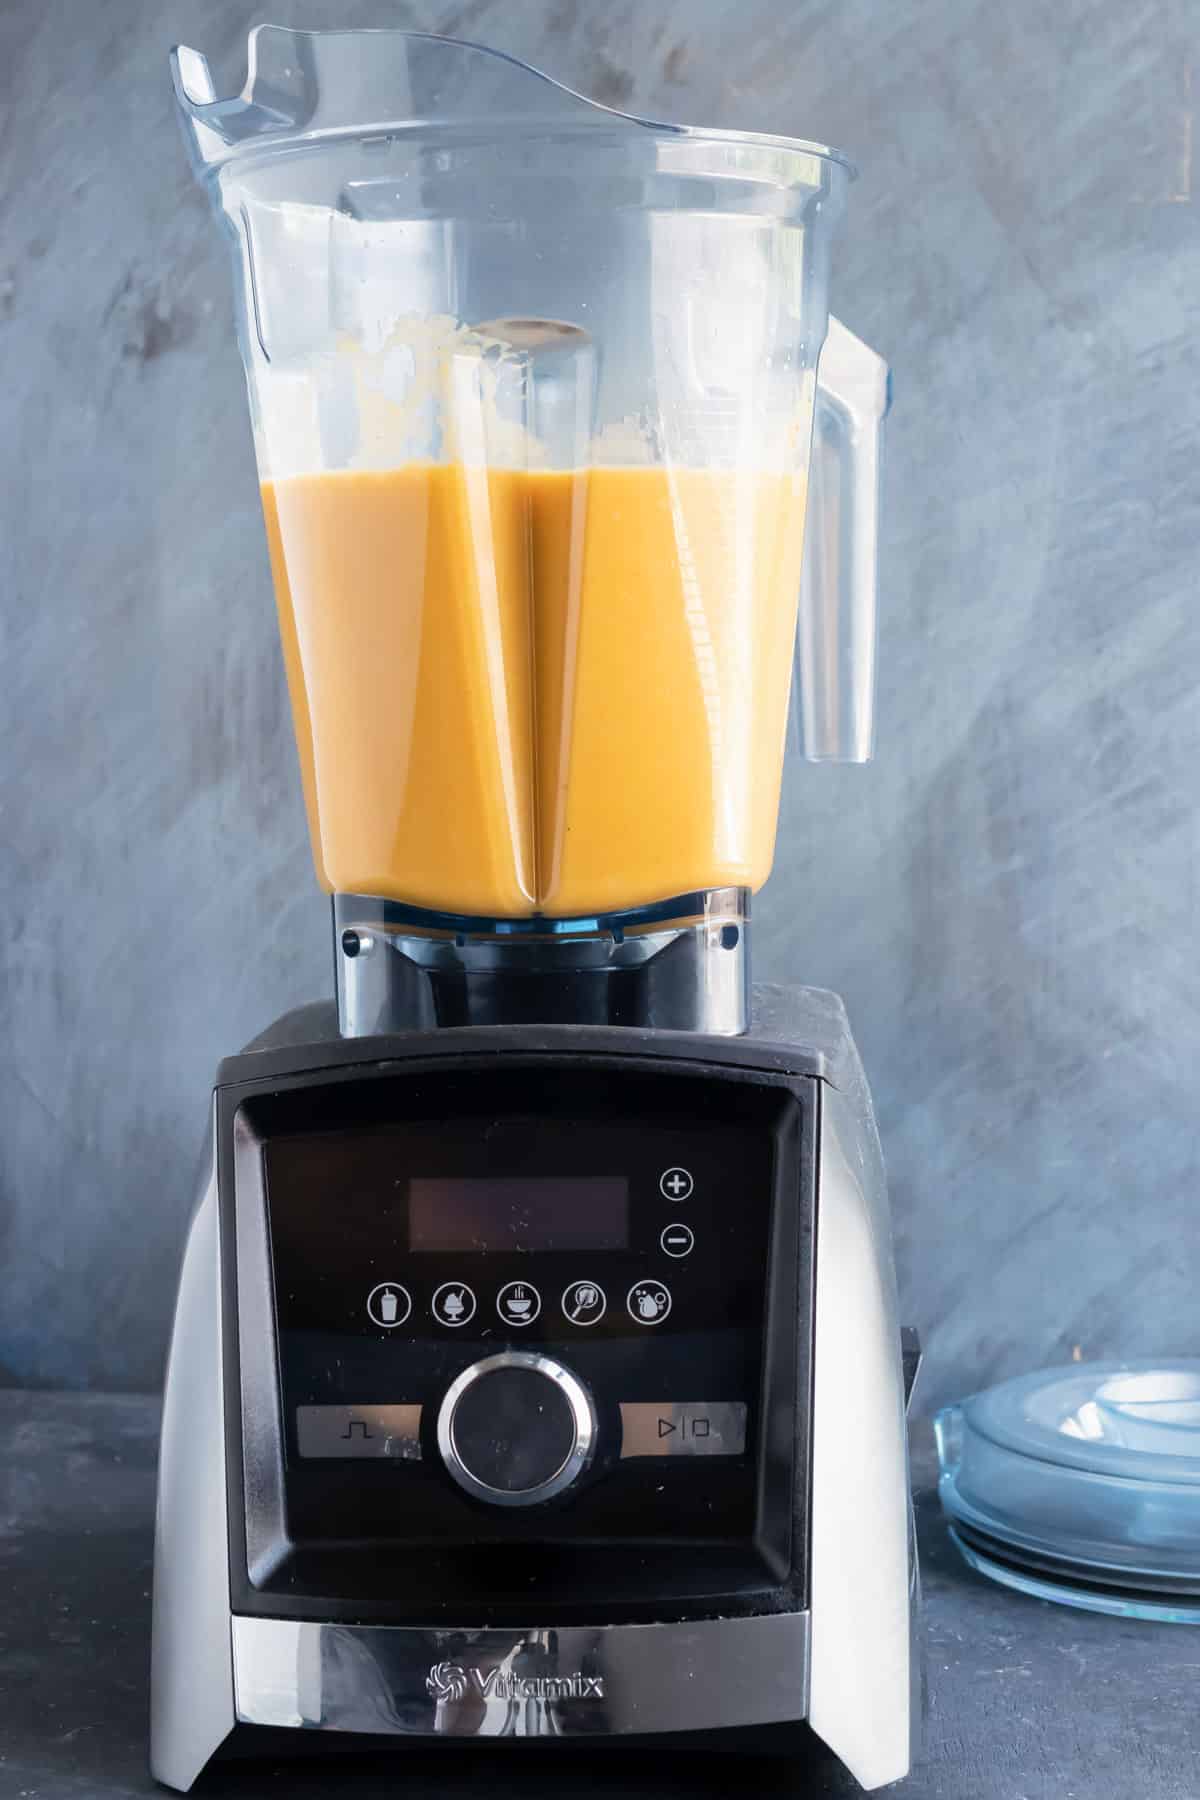 Butternut squash soup being blended until creamy in a Vitamix high-speed blender.